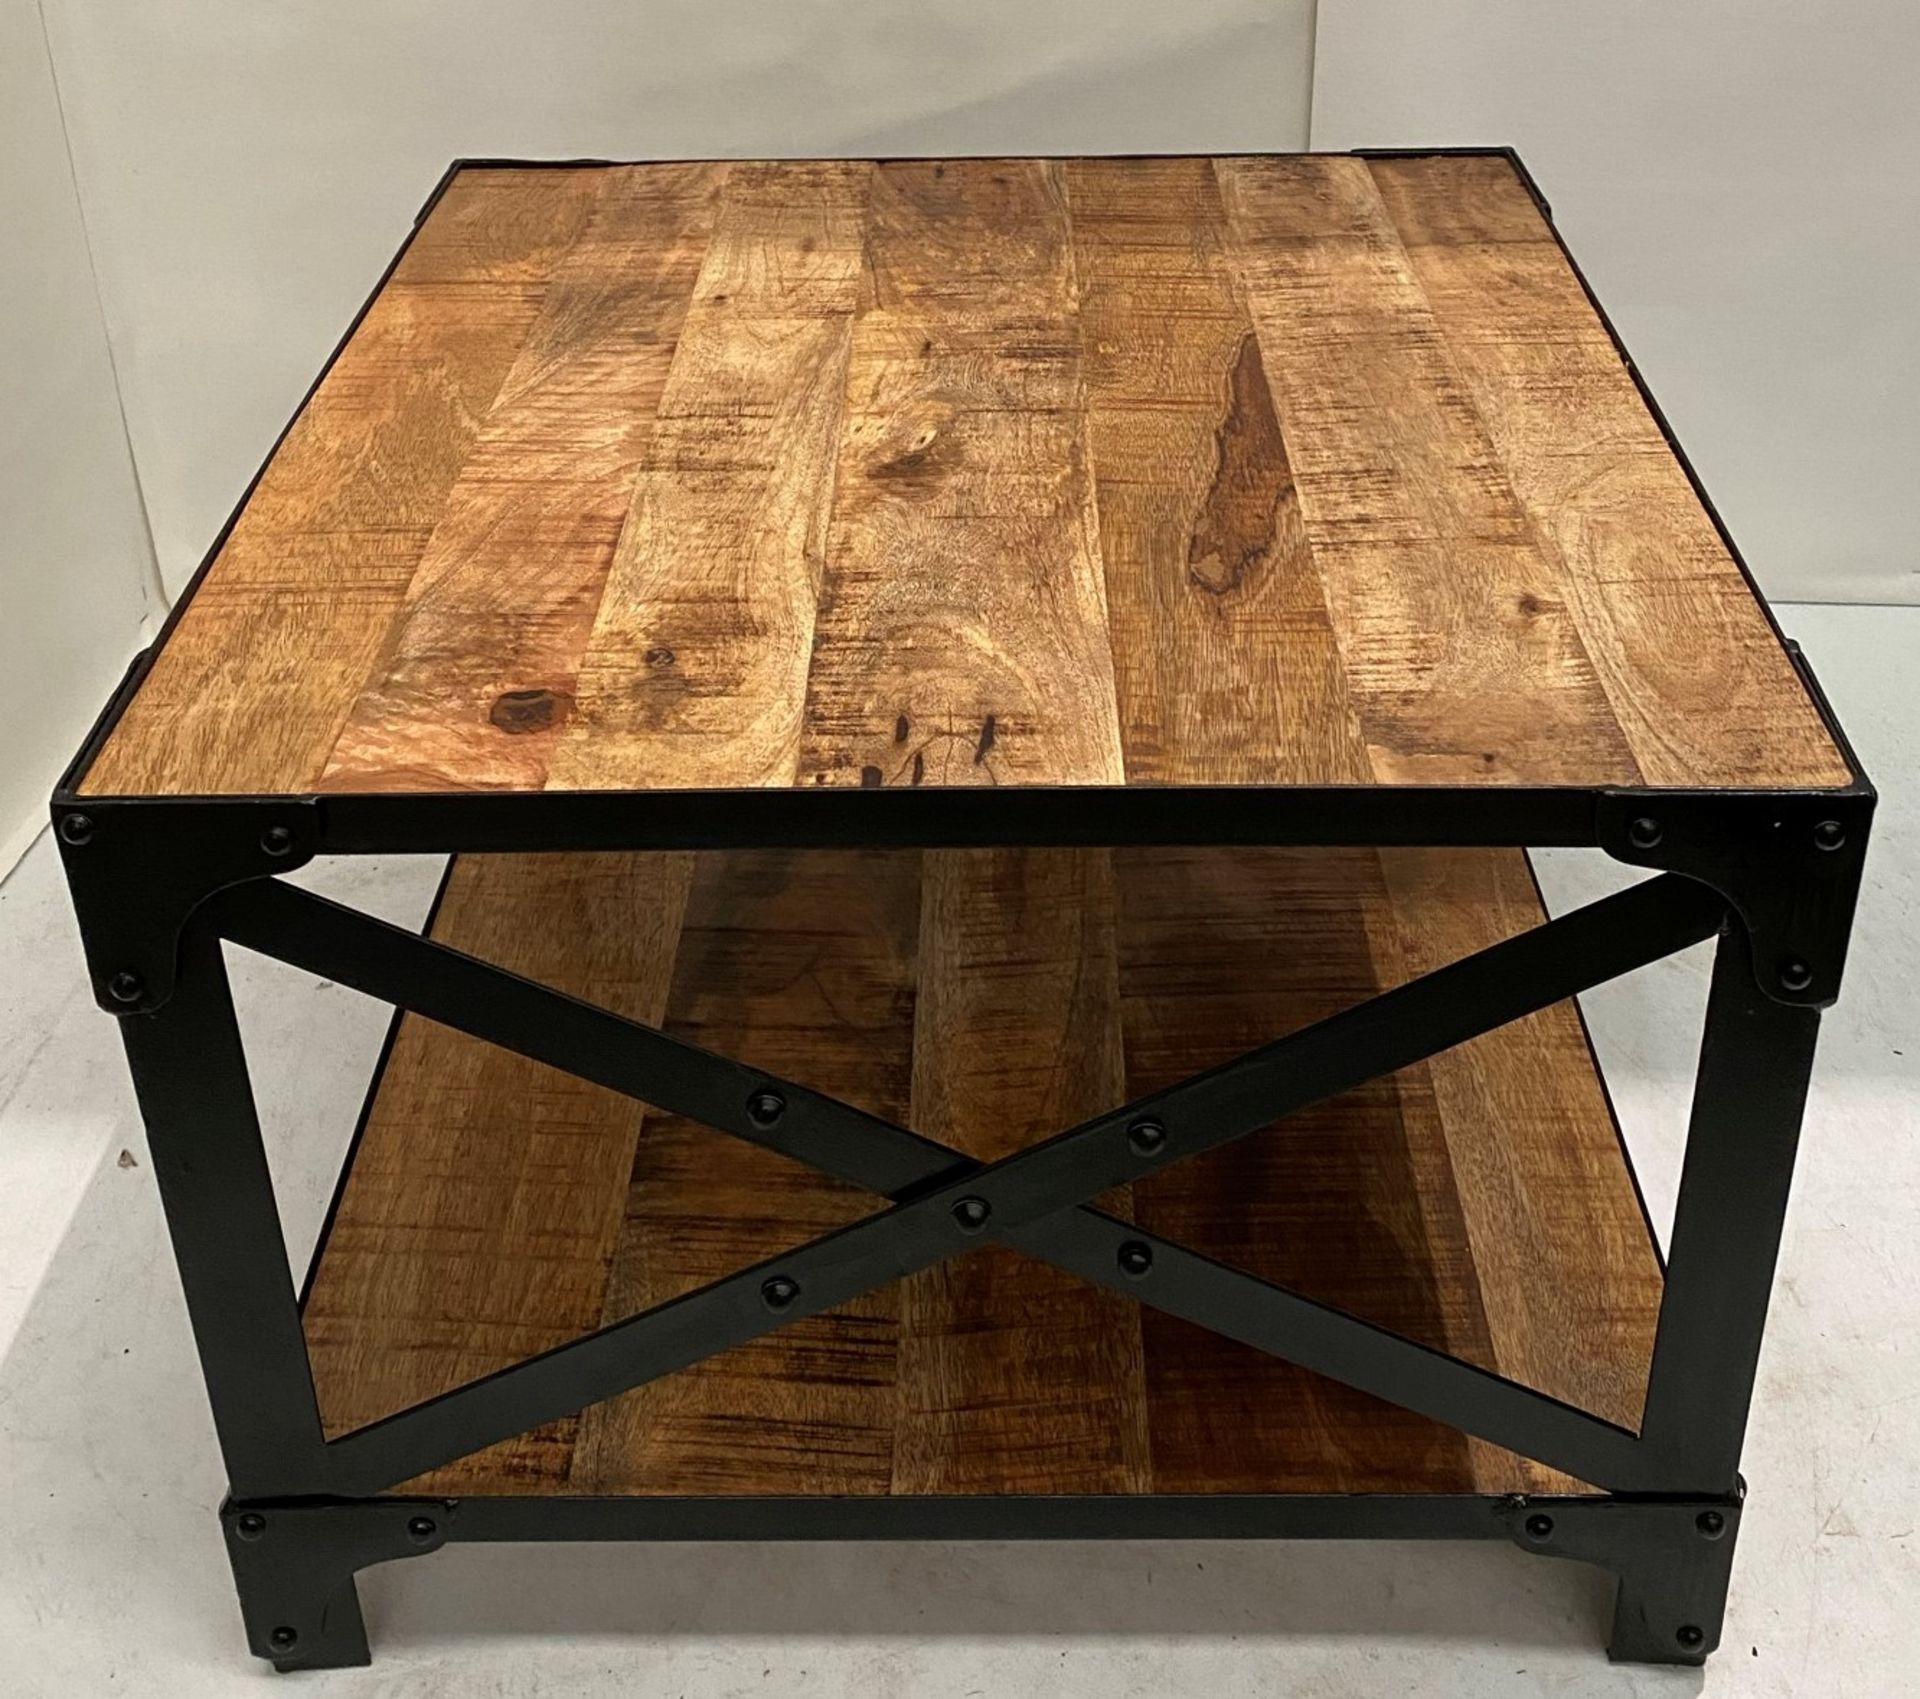 An Industrial coffee table with wooden top and black metal frame - 600mm x 600mm